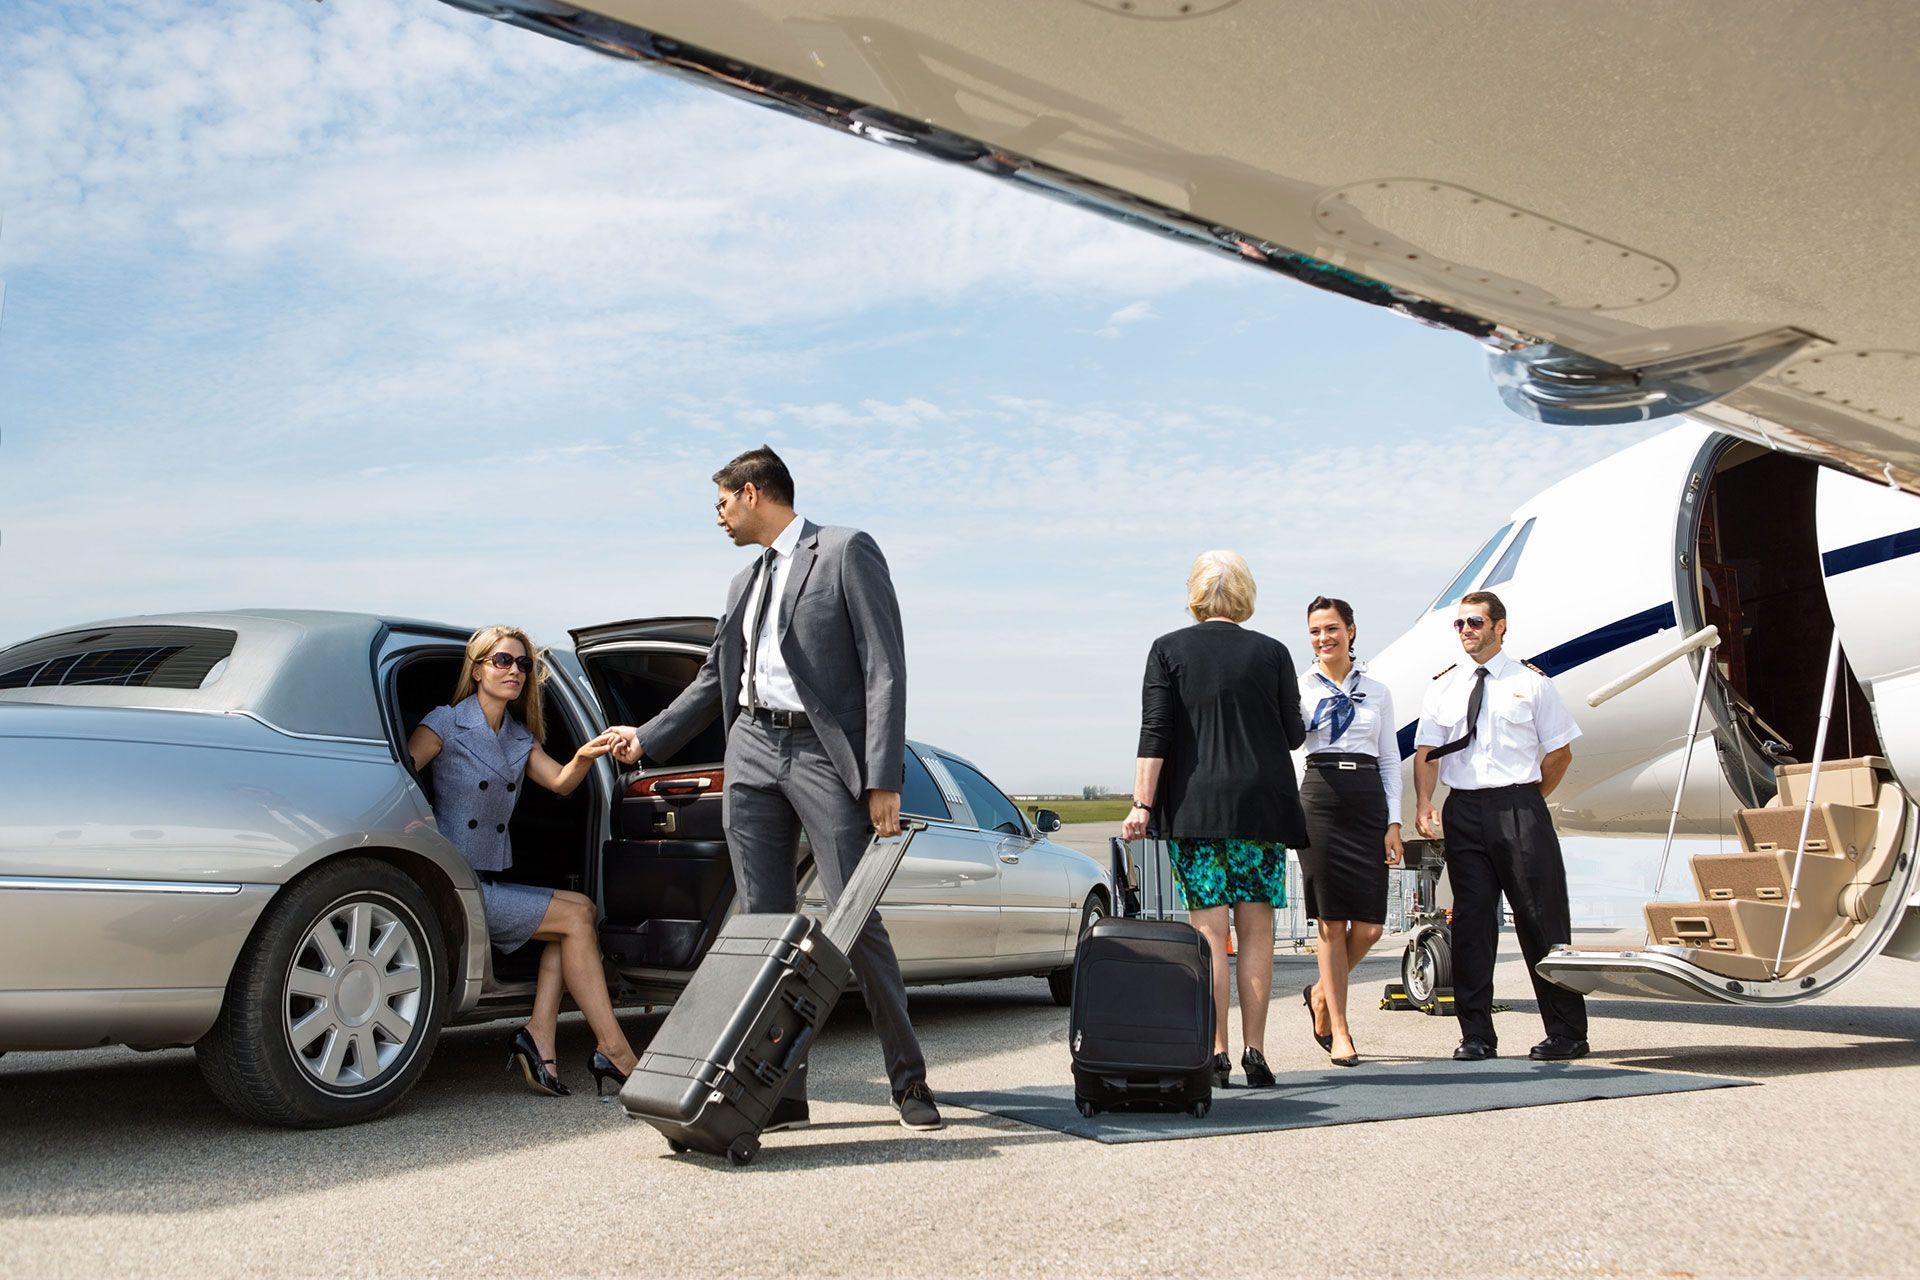 corporate persons from limousine to airplane